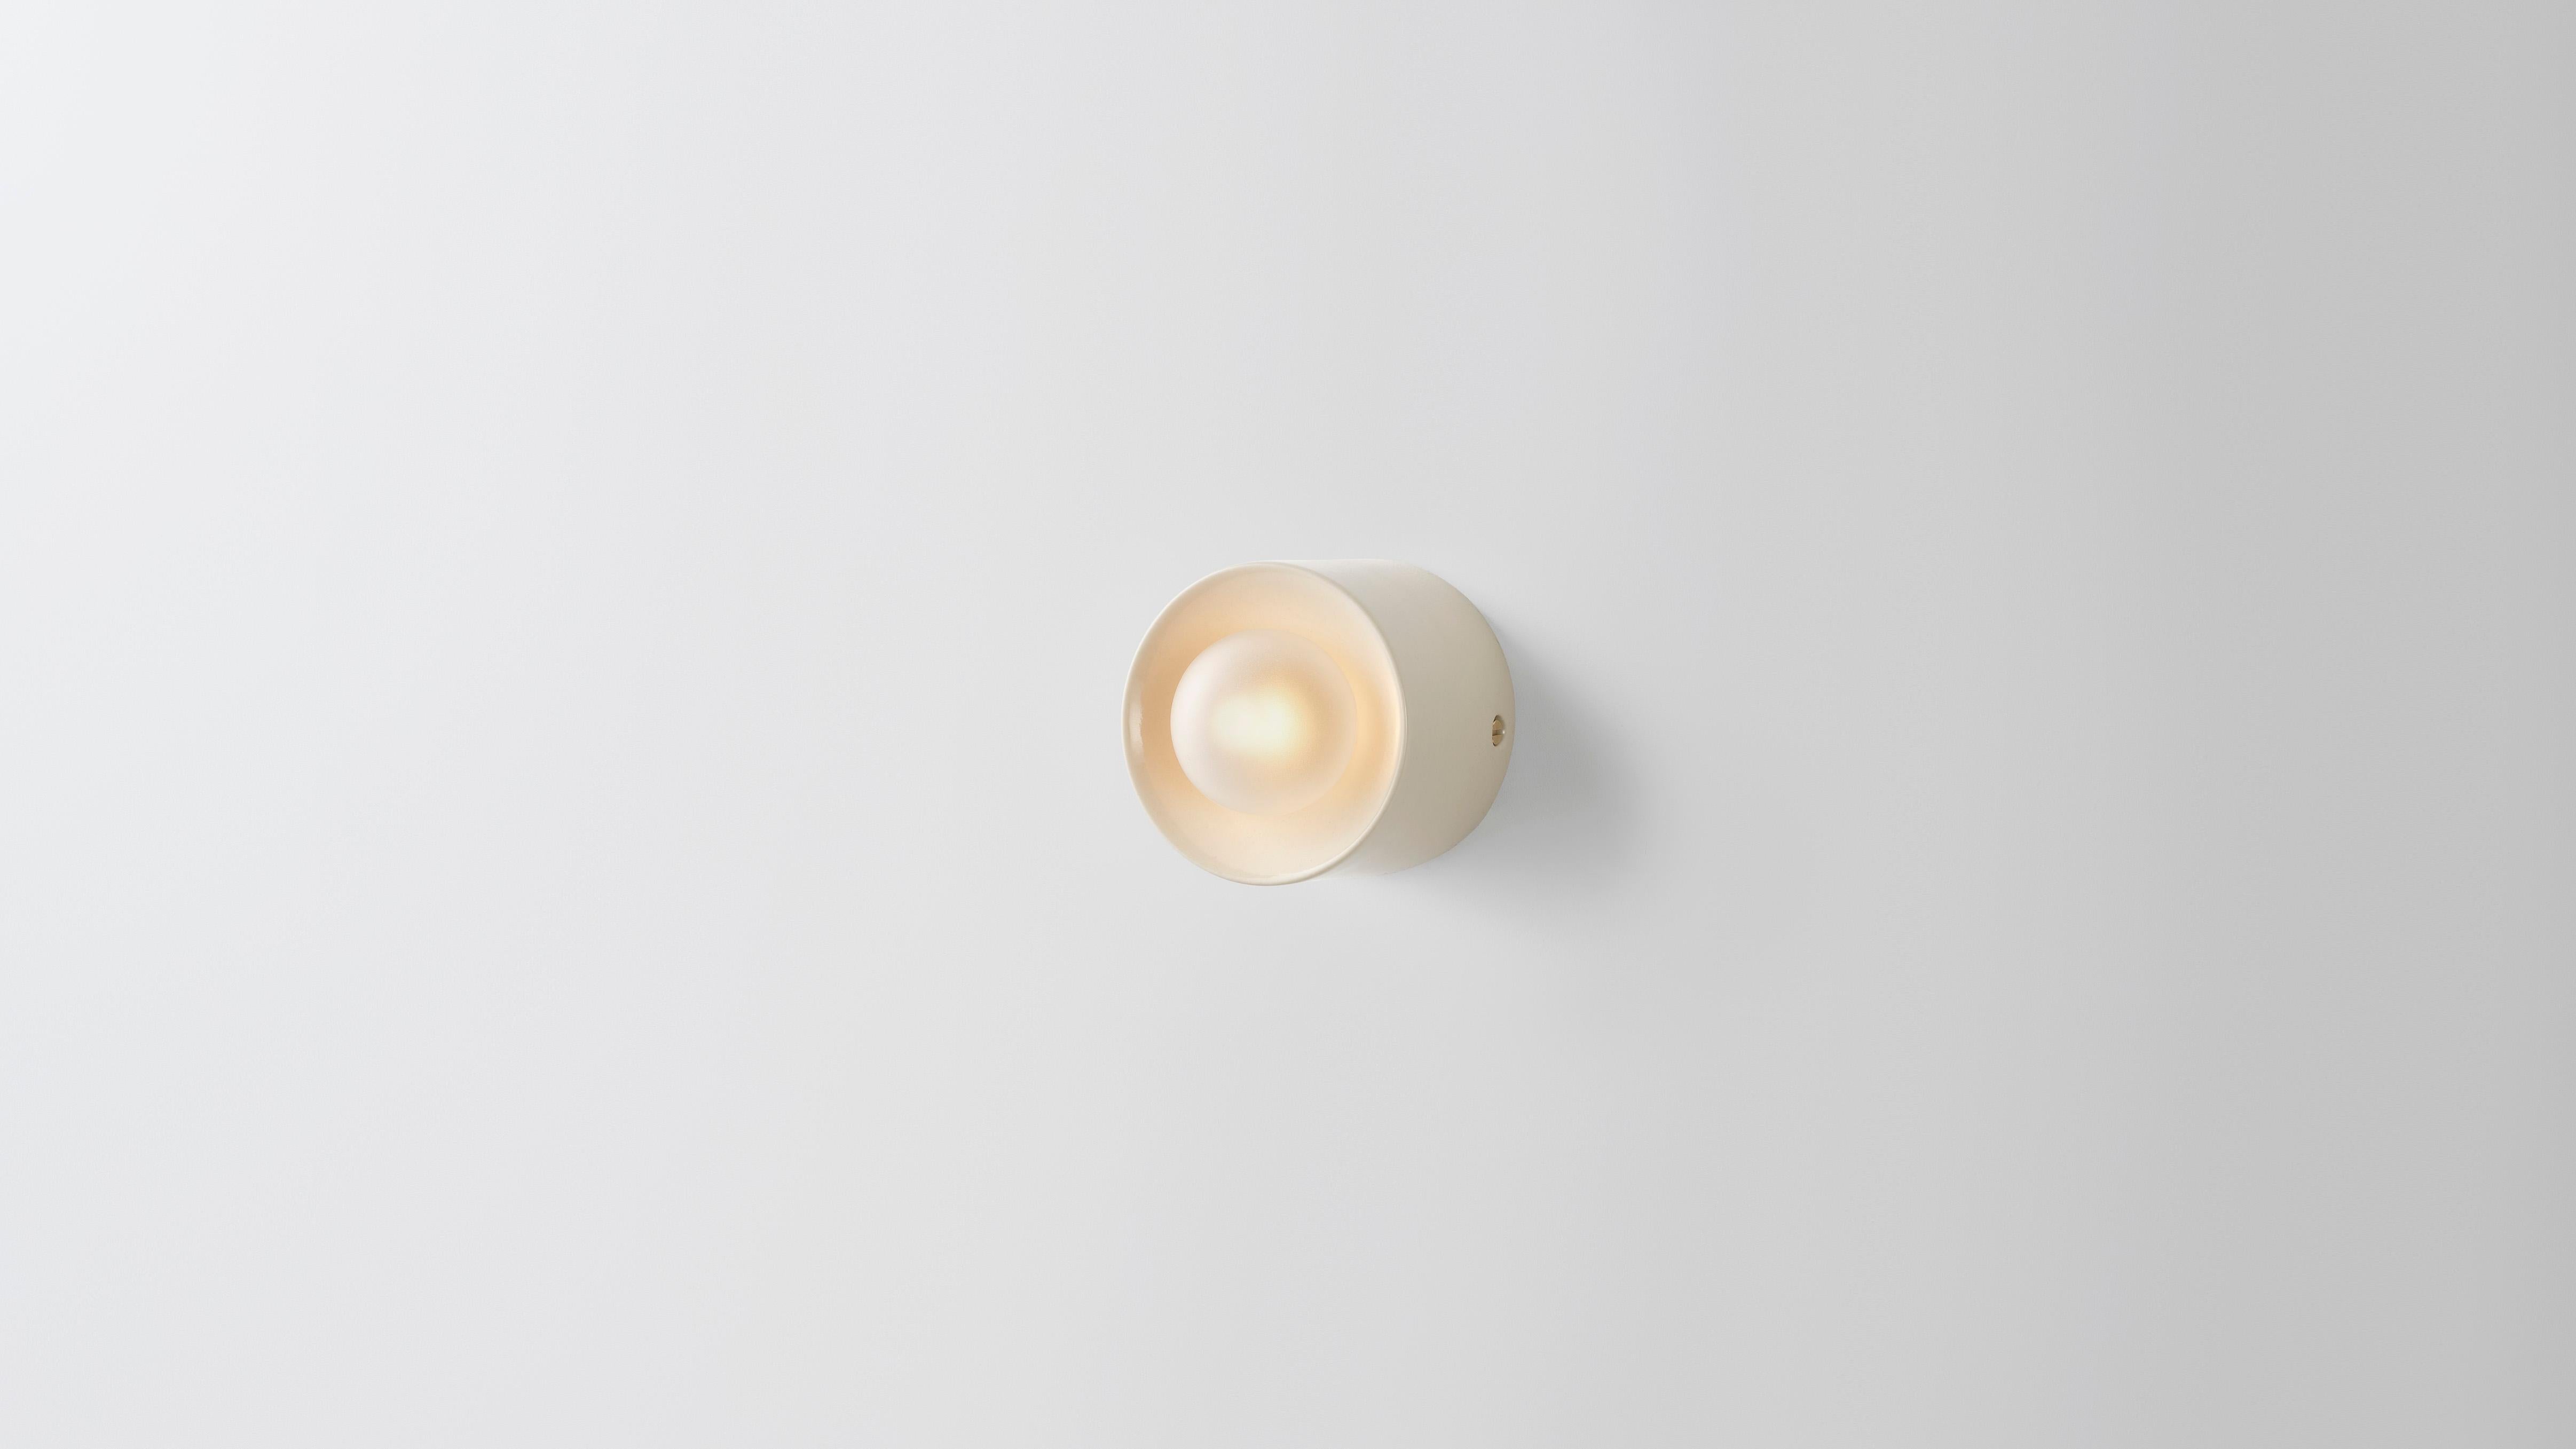 Anton Micro in ceramic by Volker Haug
Anton series
Dimensions: W 8, H 8, D 6.3 cm
Materials: Cast ceramic
Glaze: Clear
Lamp: G9 LED (240V / 120V US). 12V option available
Glass bulb: 4.5 cm ø, frosted
Weight: 1kg

Anton Micro is the smallest in the